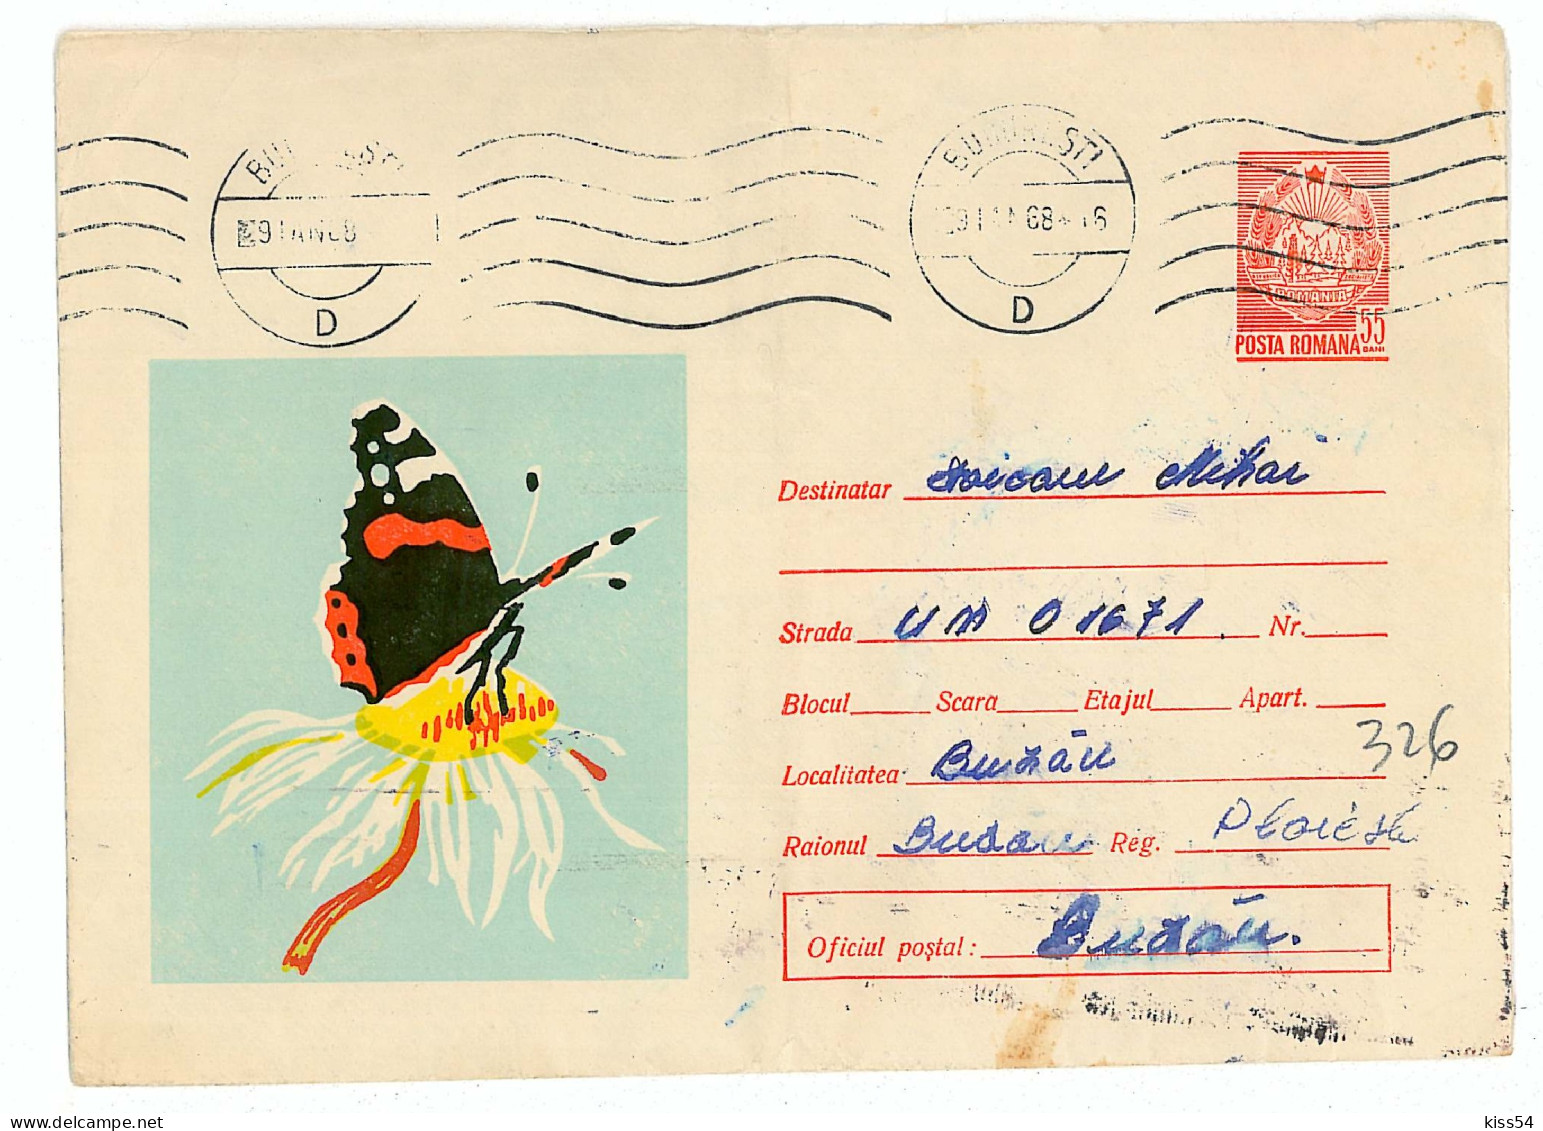 IP 67 - 037a BUTTERFLY, Romania - Stationery - Used - 1967 - Ganzsachen